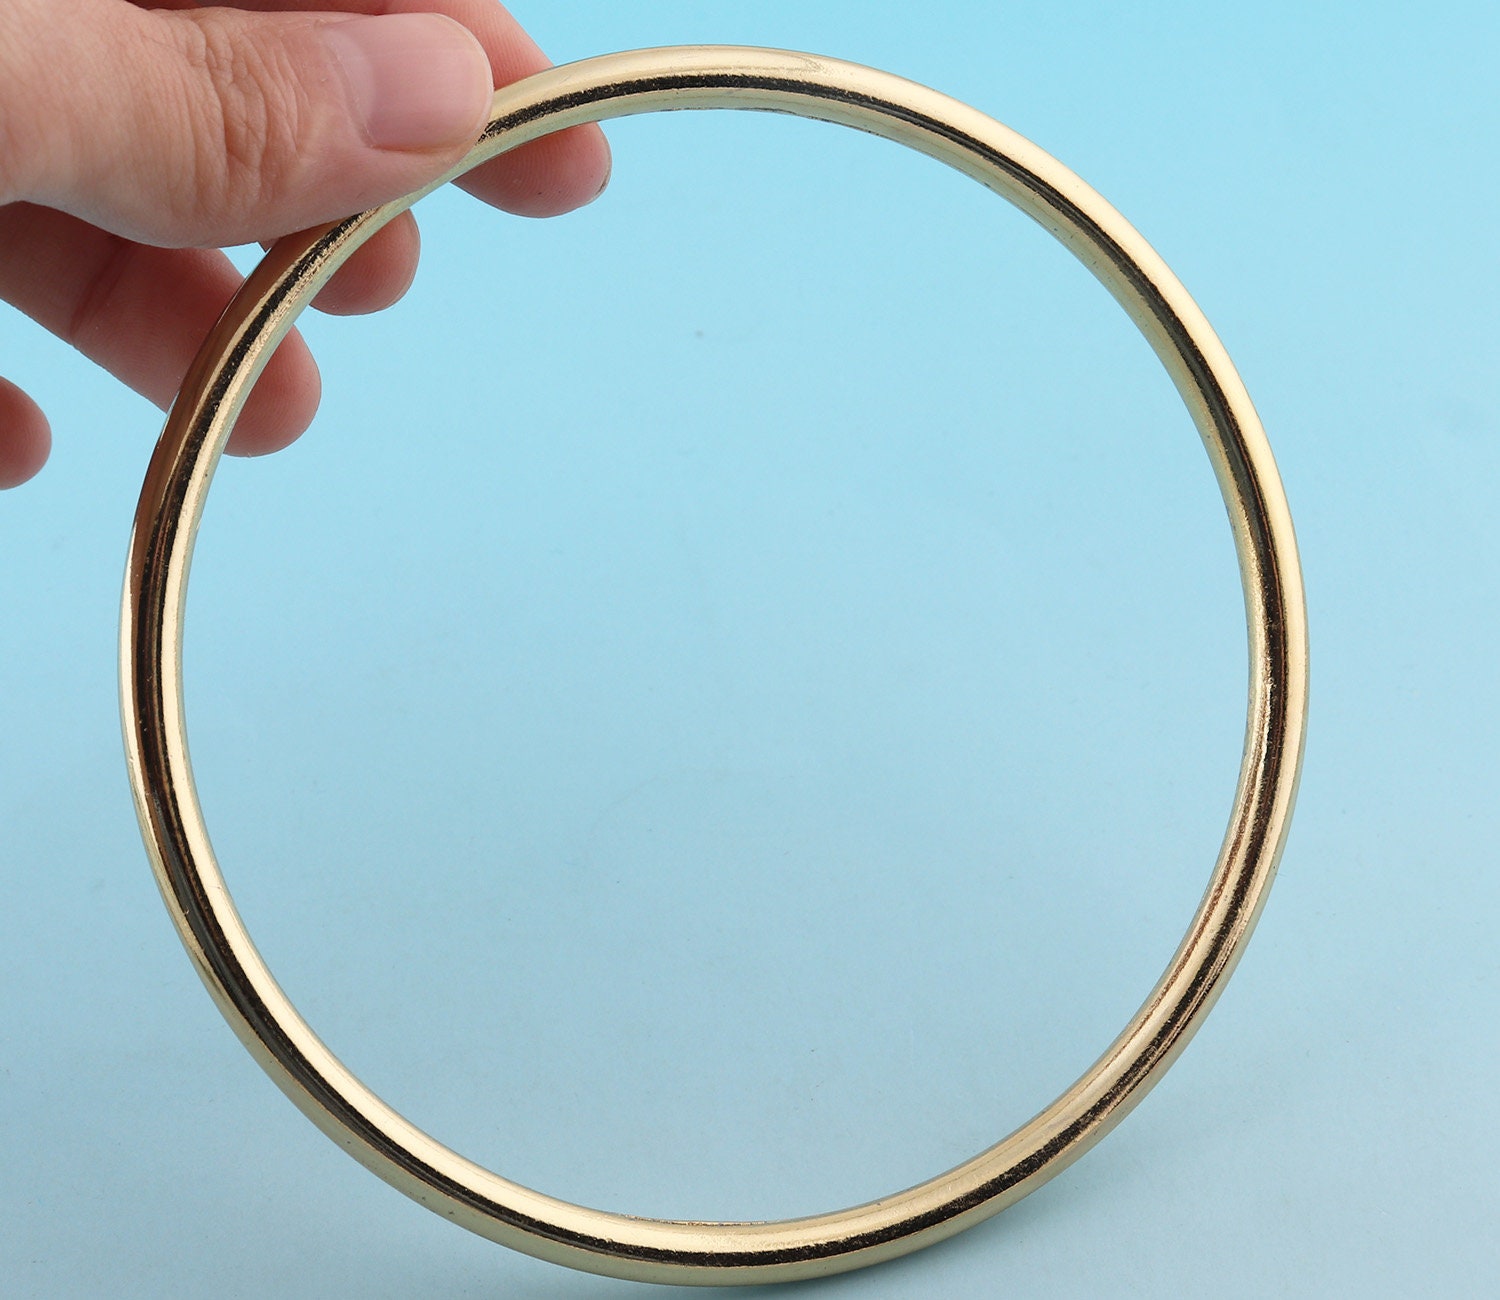 GM-013 Gold Metal O-Ring for Lingerie or Swimwear, 3 Sizes